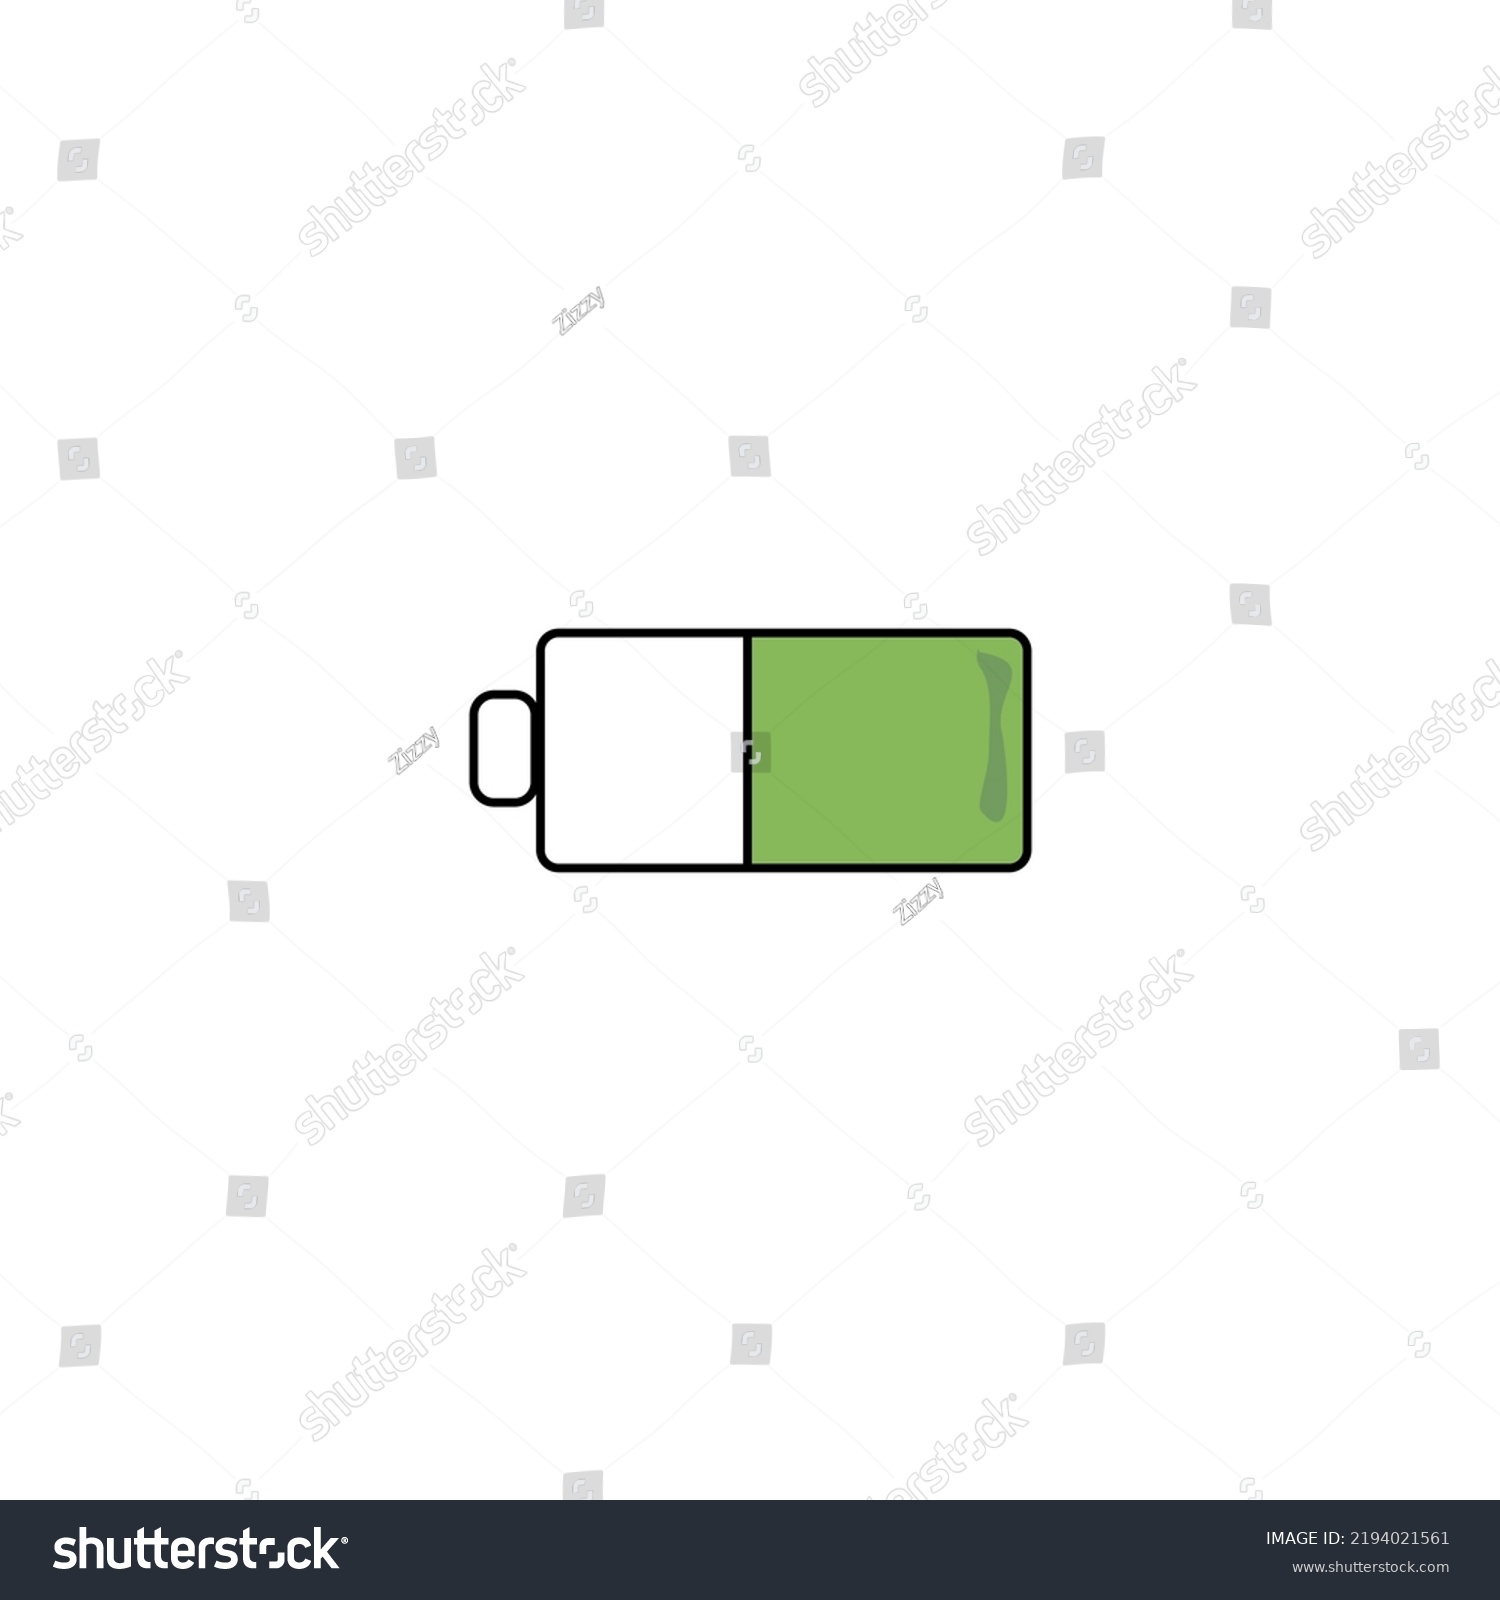 SVG of full battery icon. can be used as a design complement, used as an icon svg